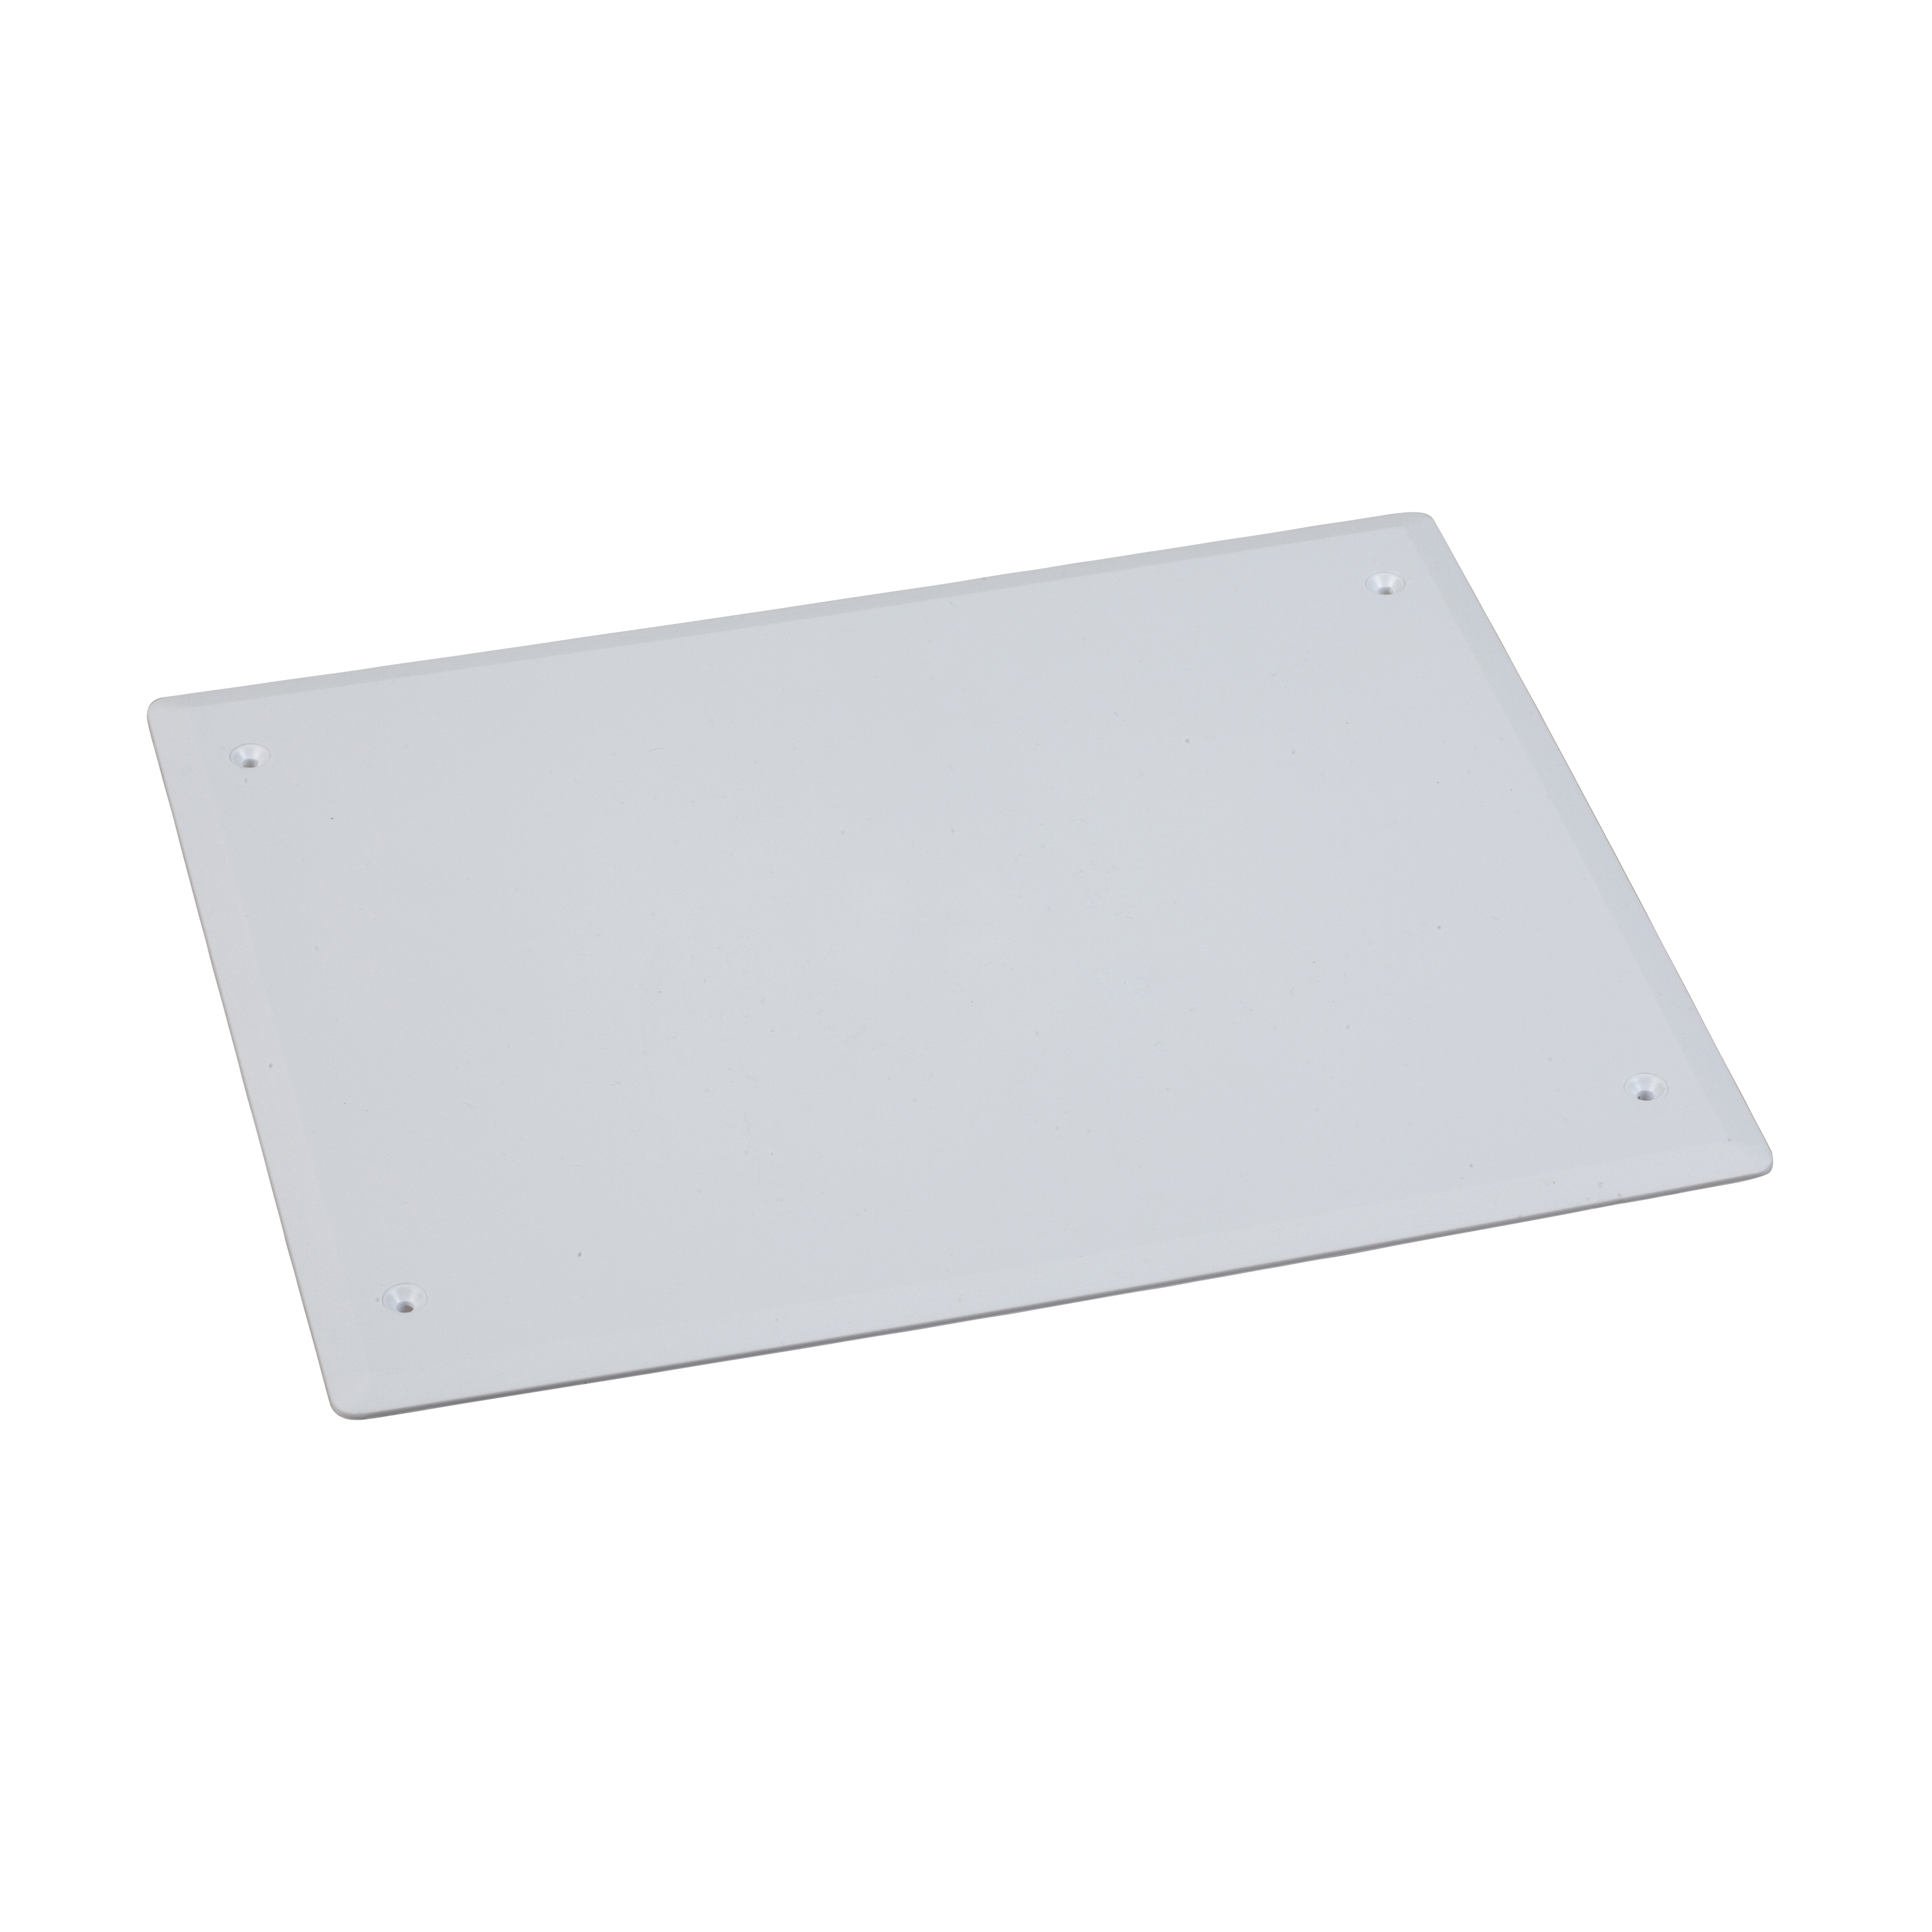 Schneider Electric 1 Gang Cover Plate